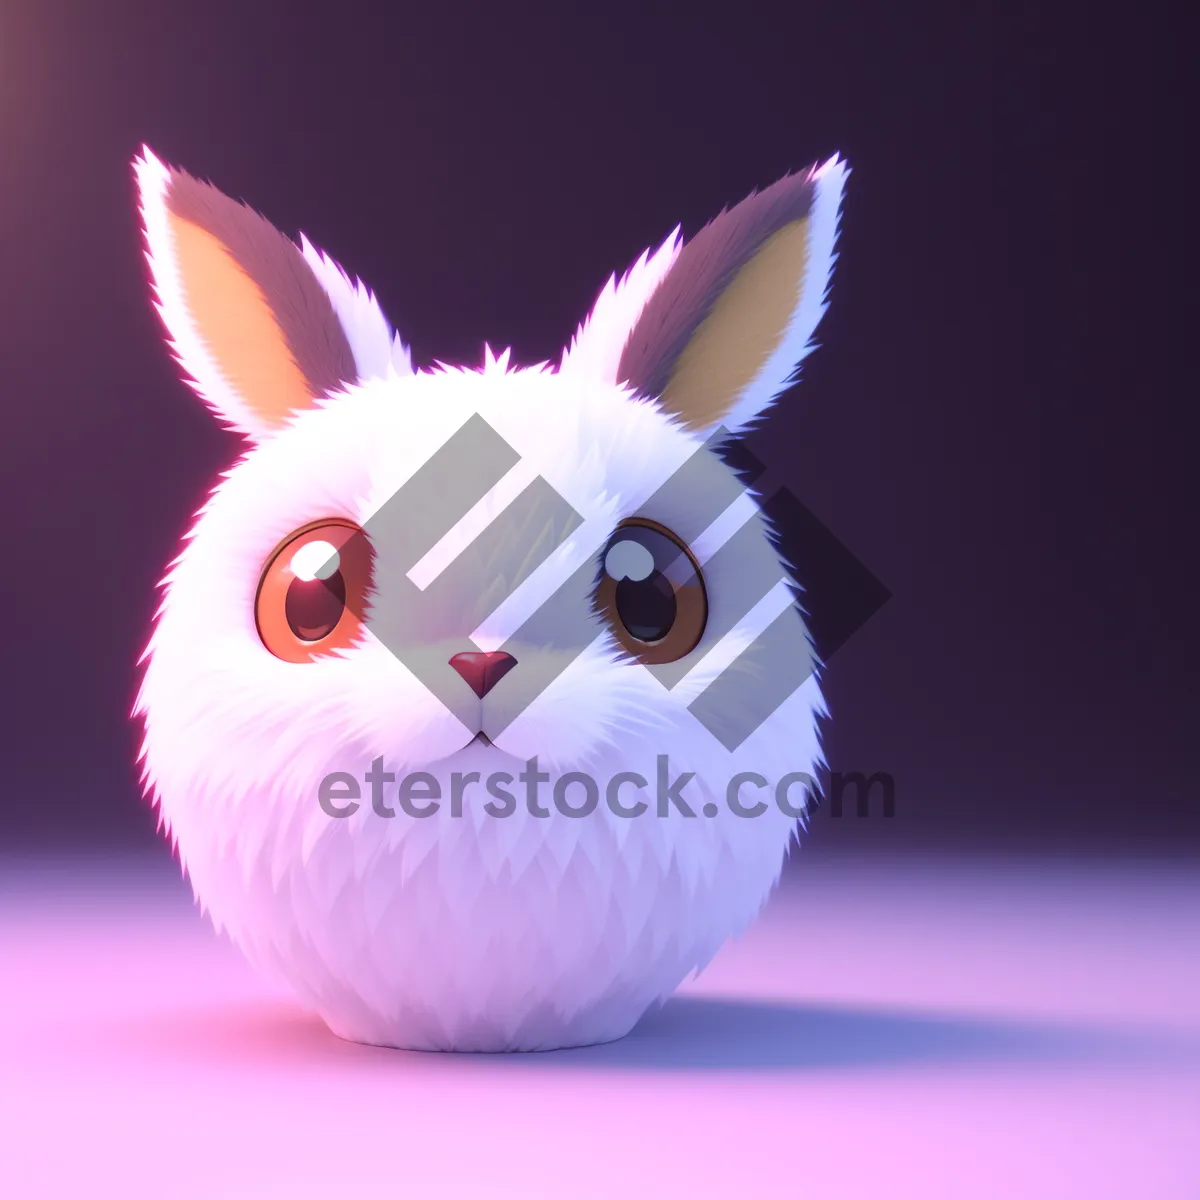 Picture of Cute Bunny with Fluffy Ears - Adorable Easter Image